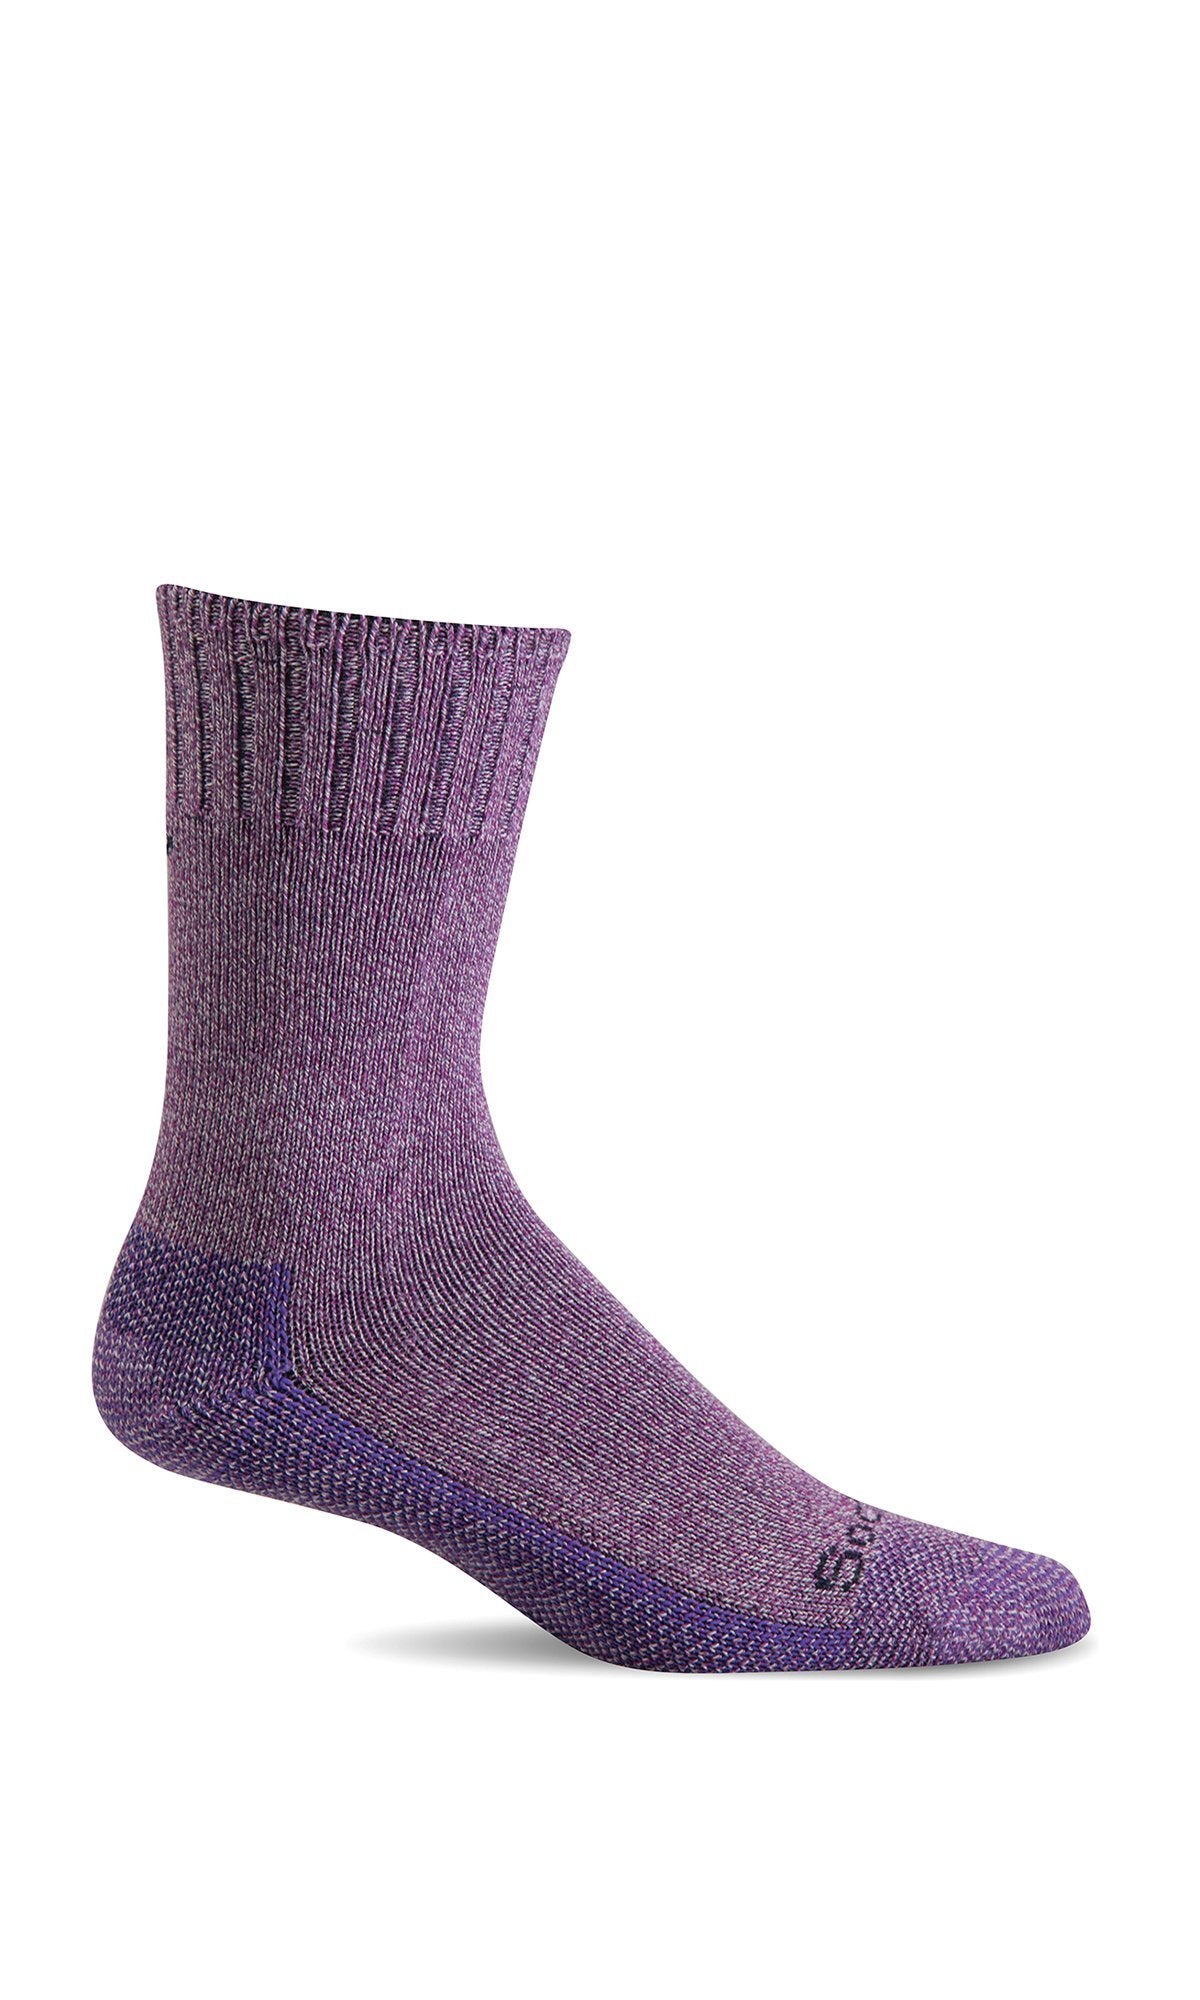 Pamper yourself and your feet in Sockwell's Big Easy relaxed fit non-binding diabetic-friendly merino wool socks in beautiful violet